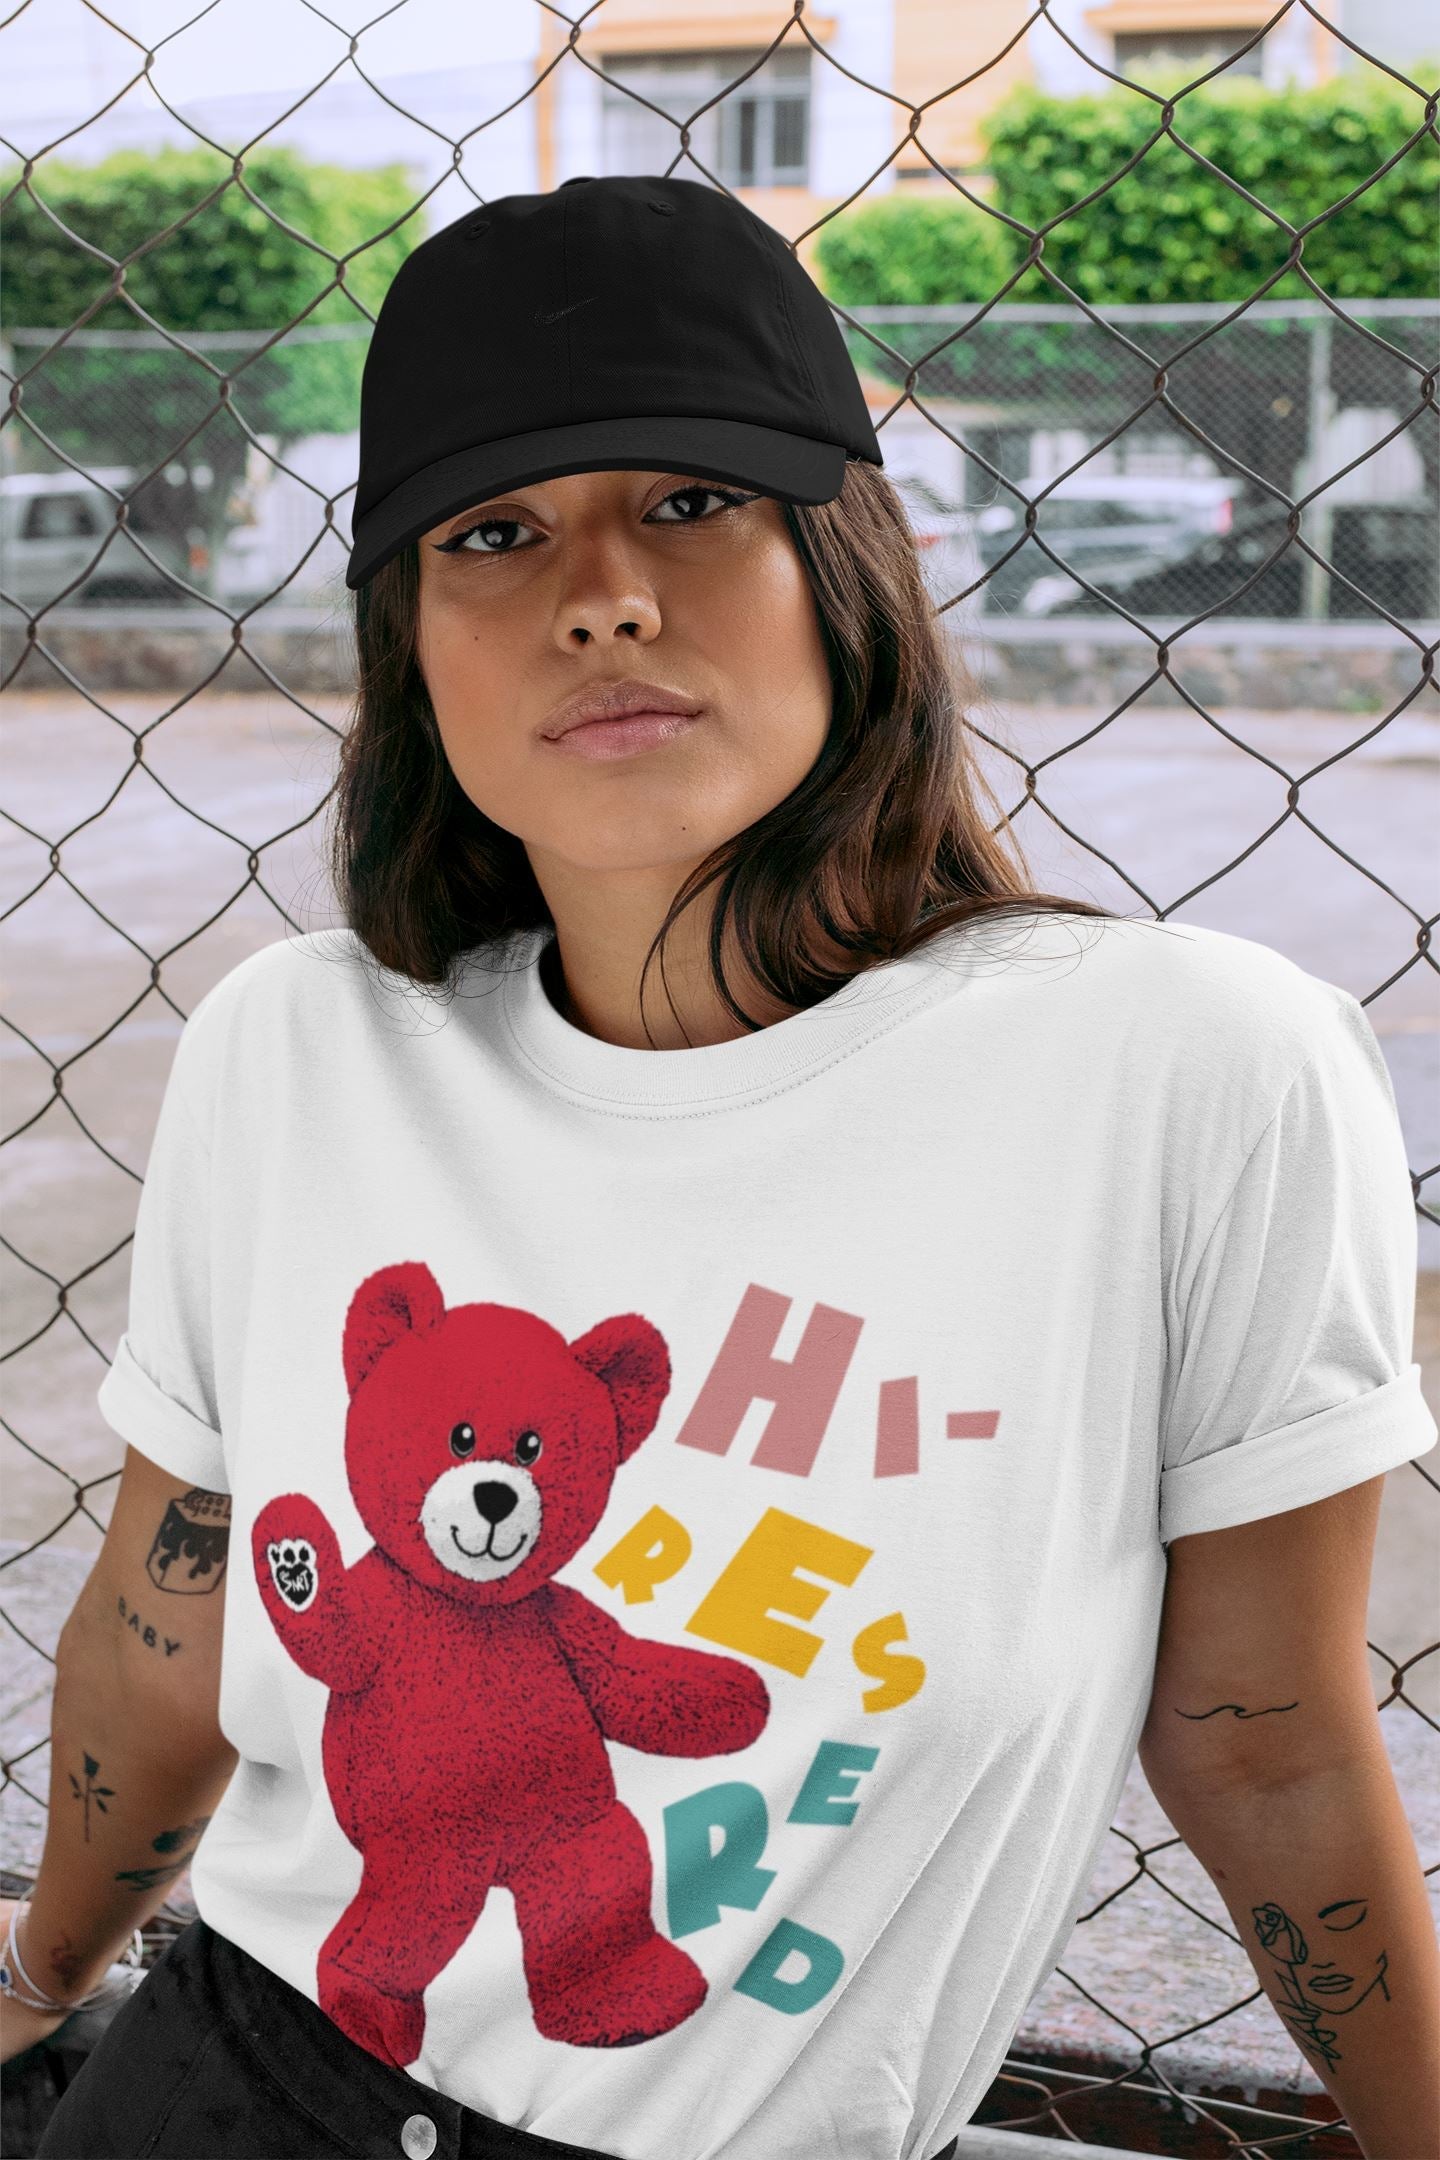 Yeezy 700 Hi-Res Red Sneaker Match Tees Hello Bear Sneaker Tees Yeezy 700 Hi-Res Red Sneaker Release Tees Unisex Shirts